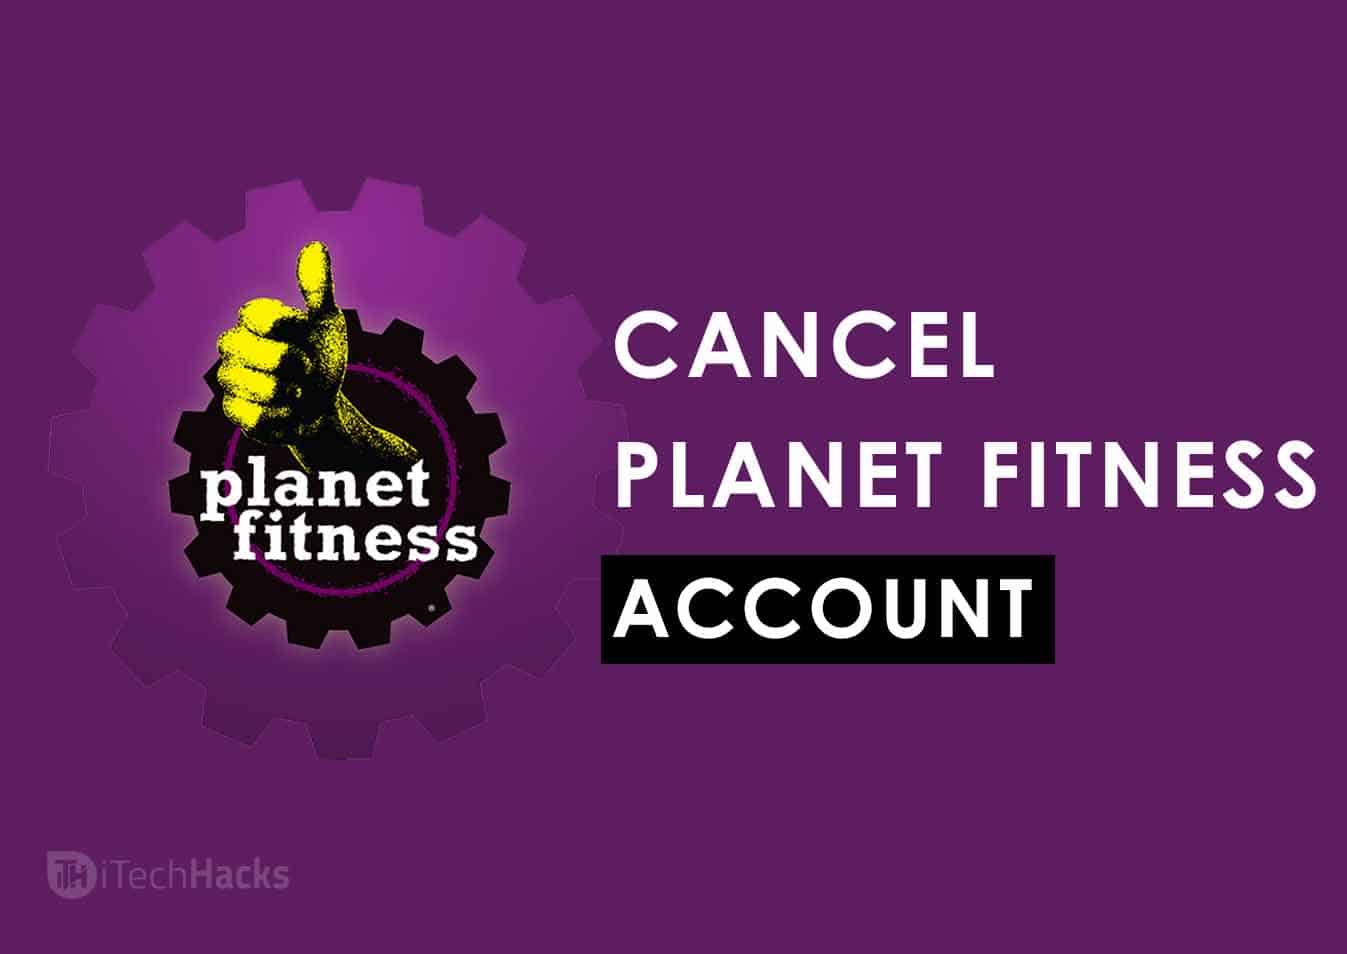 How To Cancel Your Planet Fitness Account